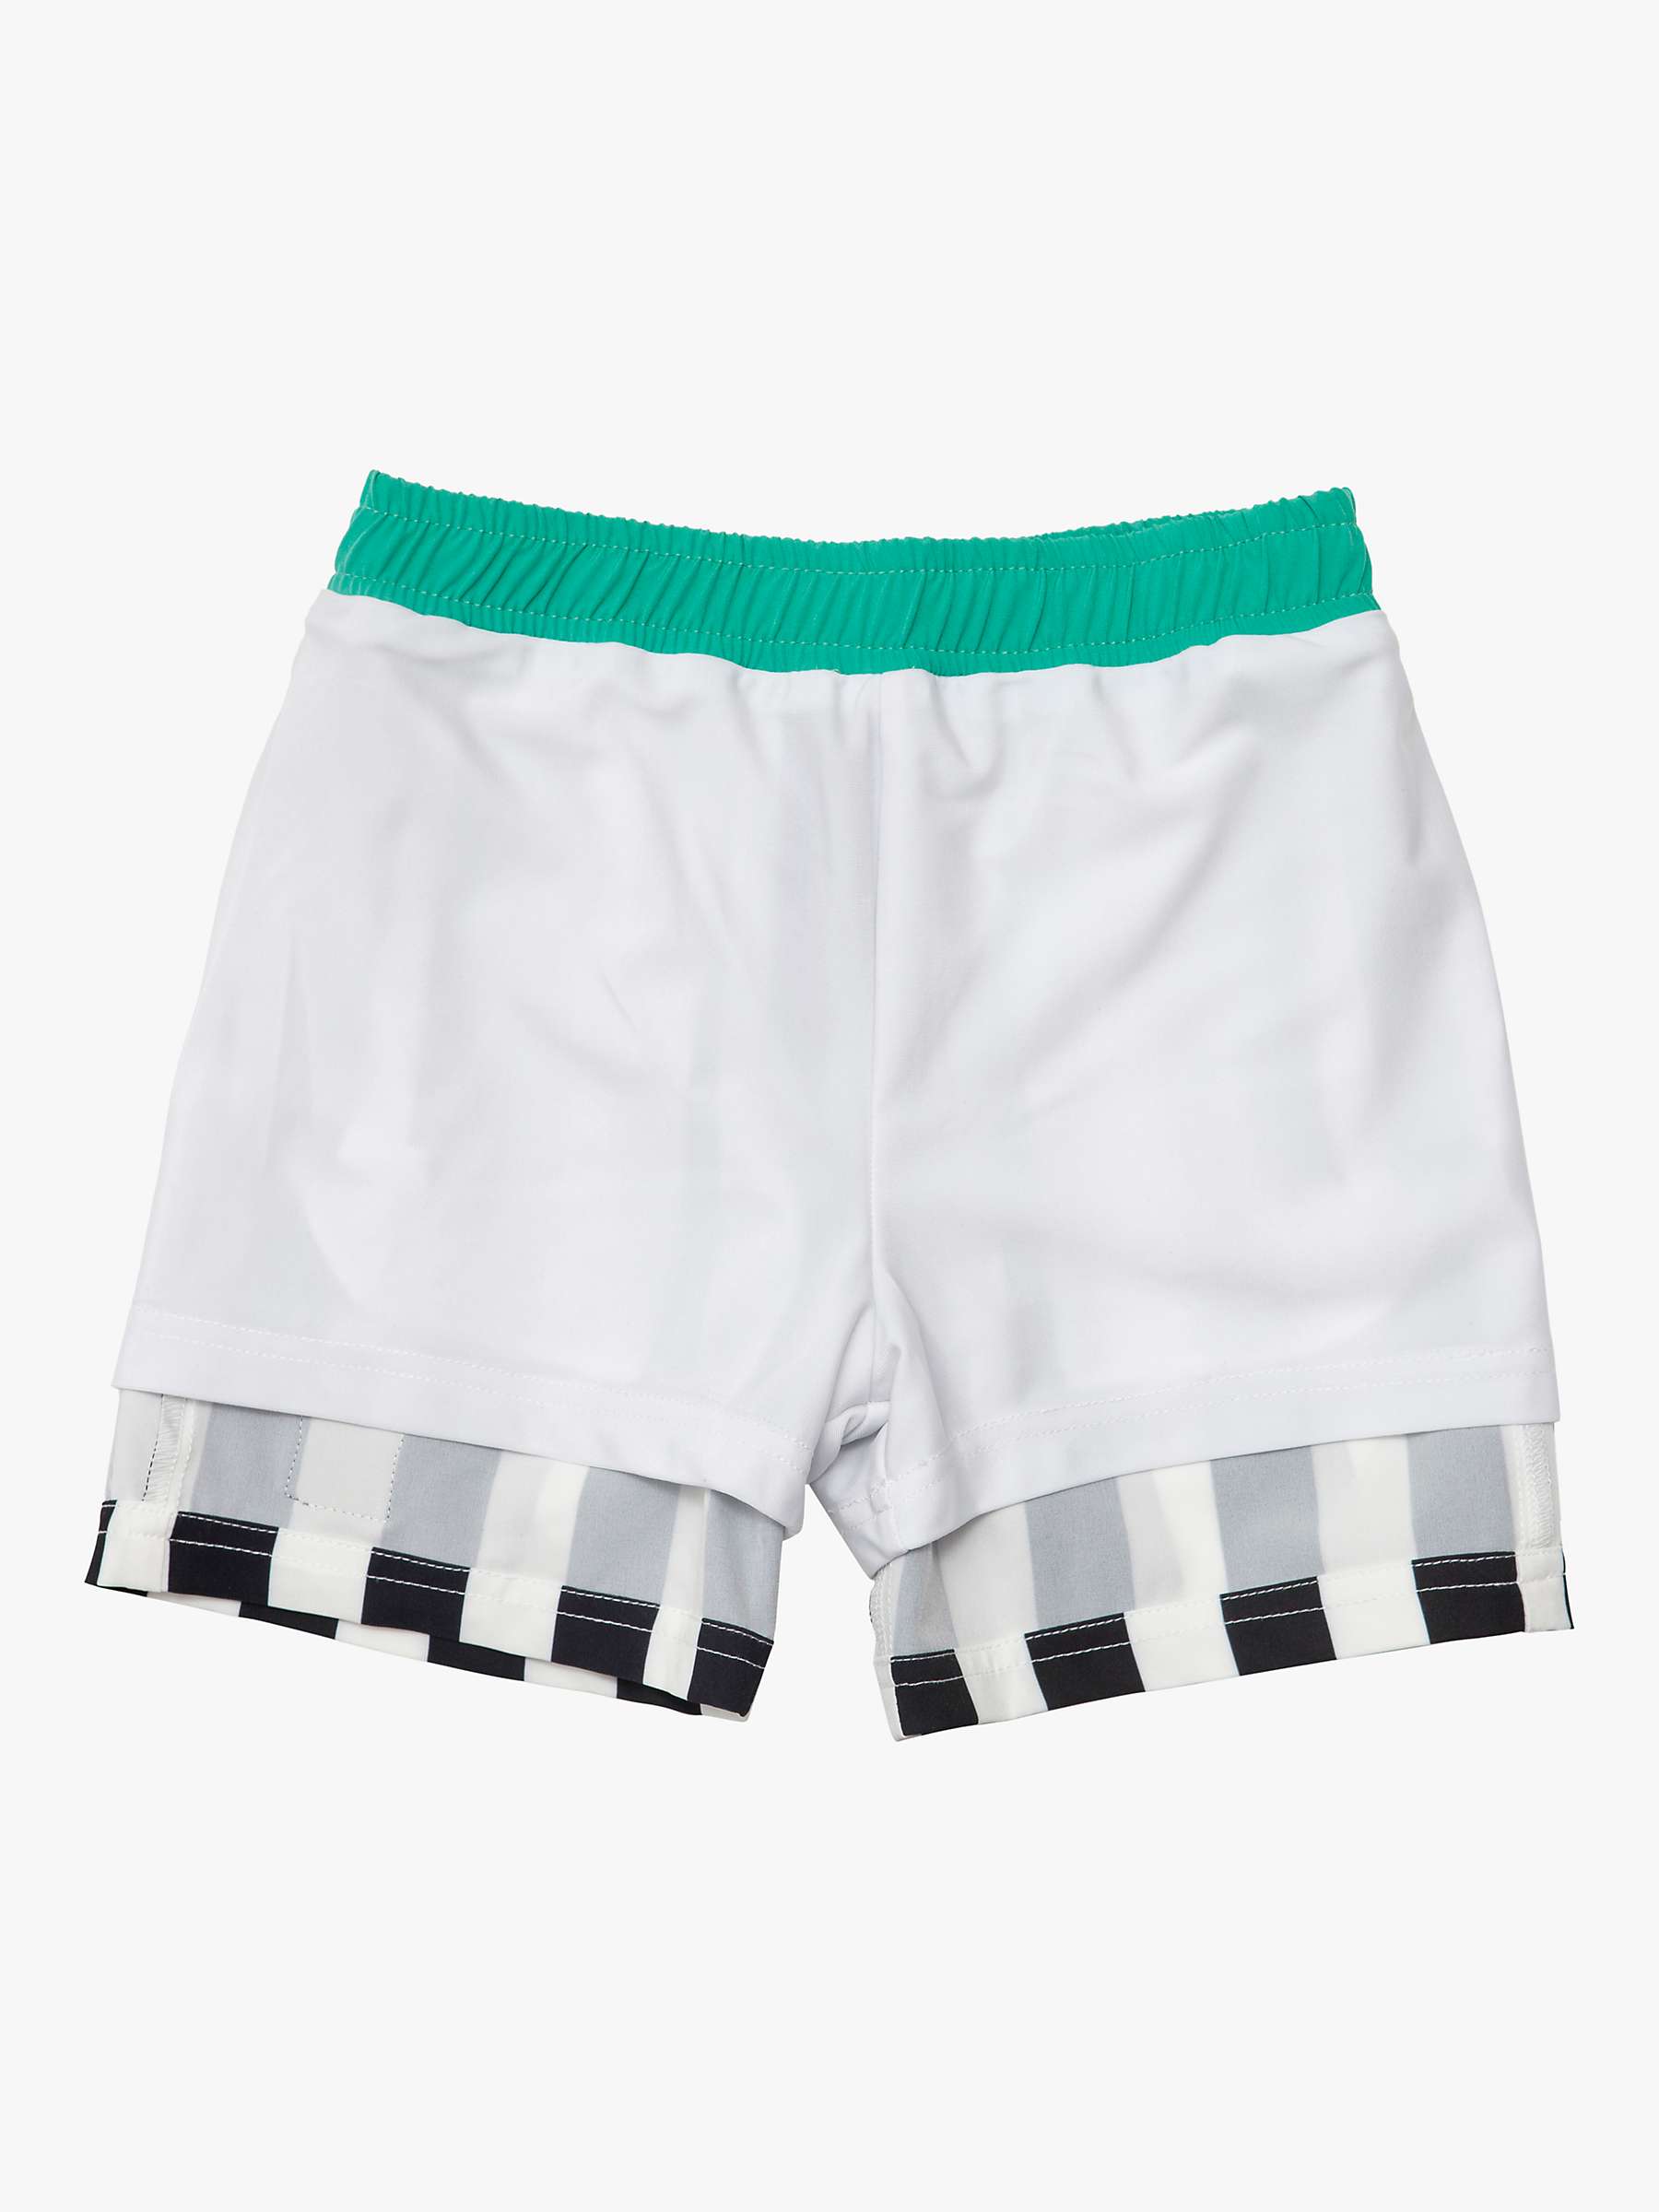 Buy Roarsome Patch Striped Swim Trunks, Black/White Online at johnlewis.com